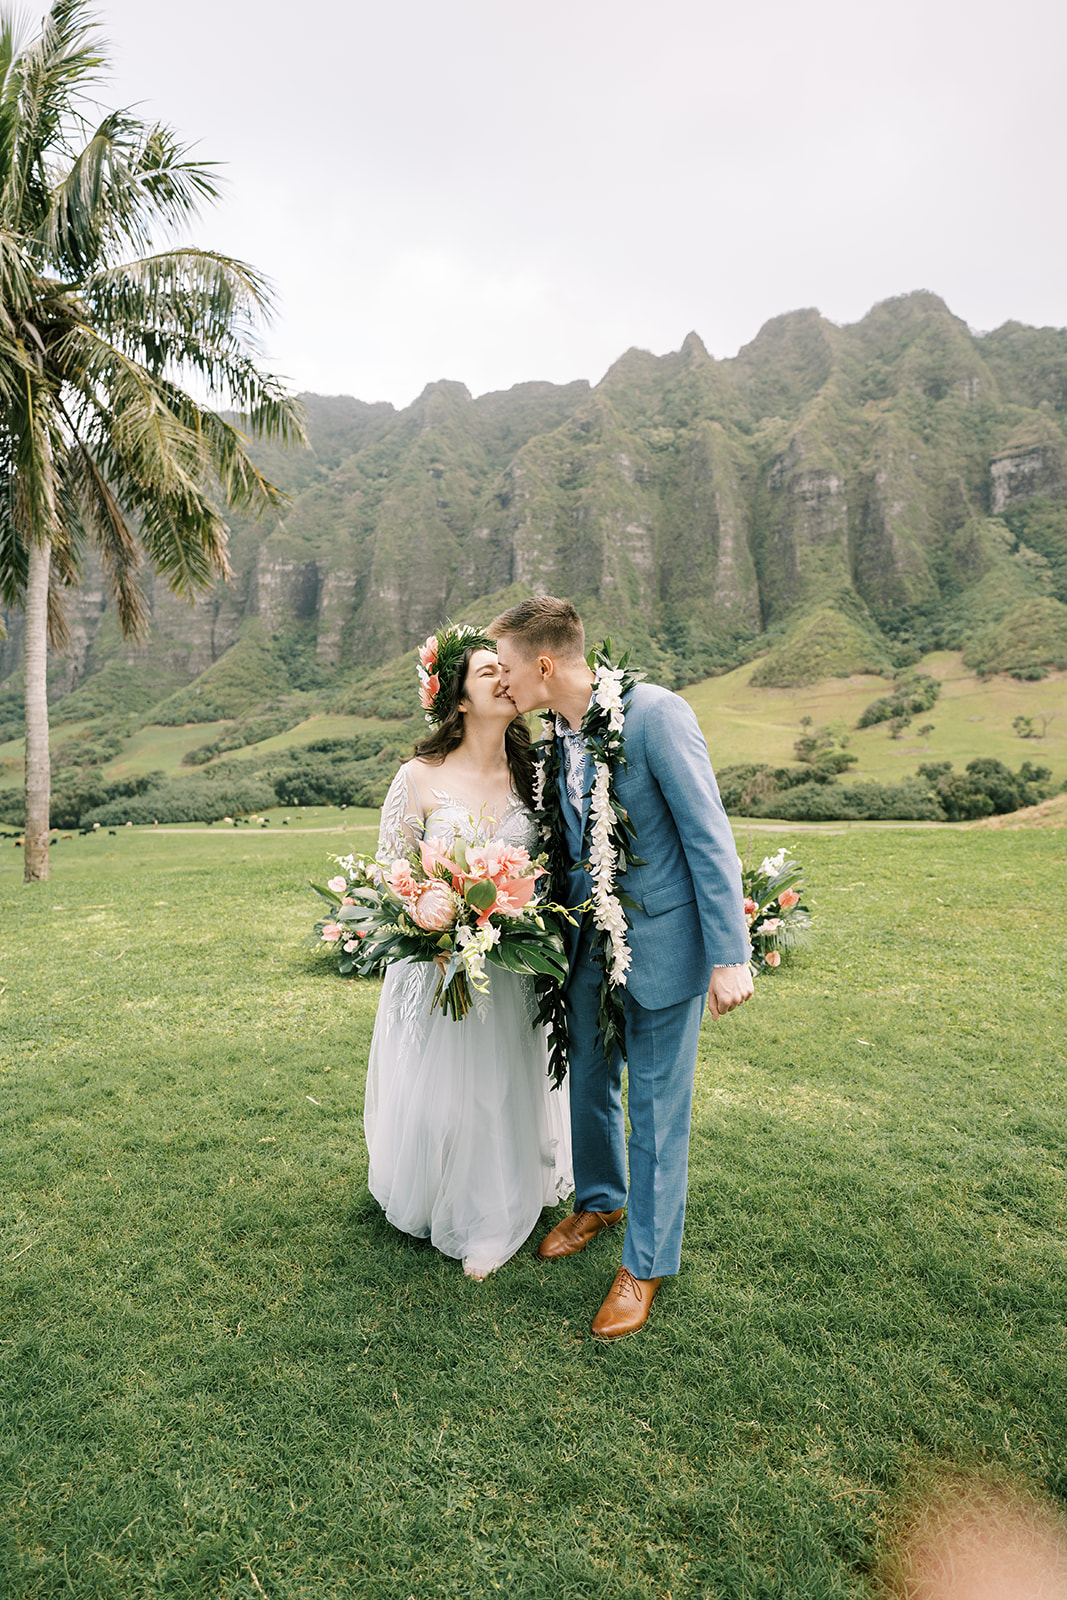 A bride and groom kissing in the grass with palm trees in the background at a Kualoa Ranch Wedding.